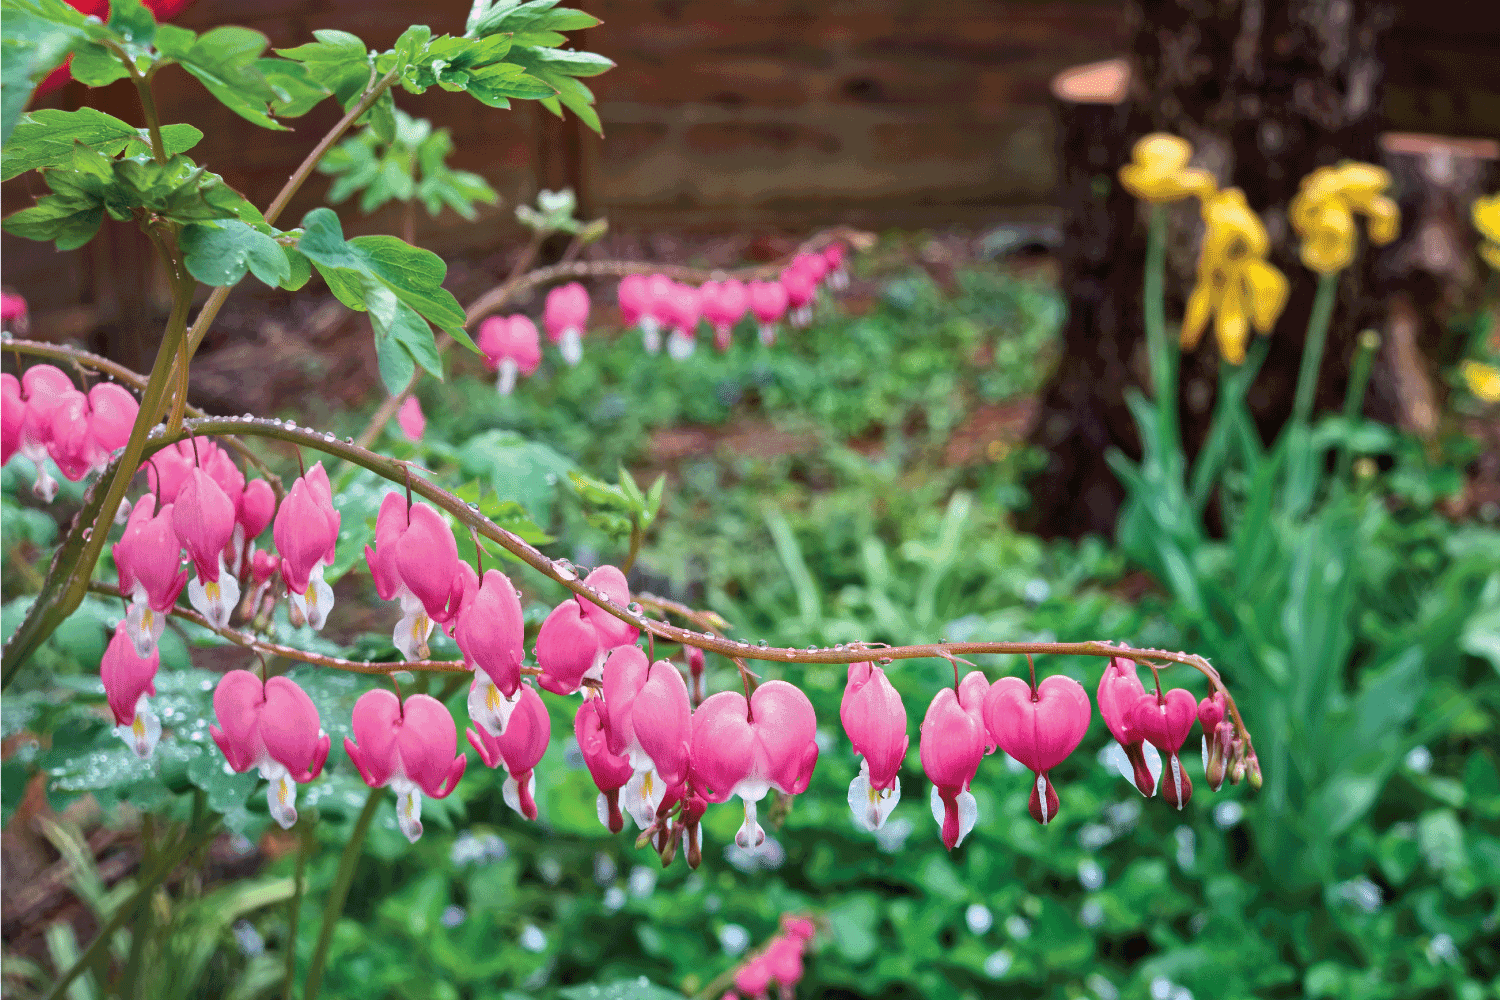 Lamprocapnos spectabilis or common bleeding heart plant. Plant is in full bloom with pink red blossoms or flowers.